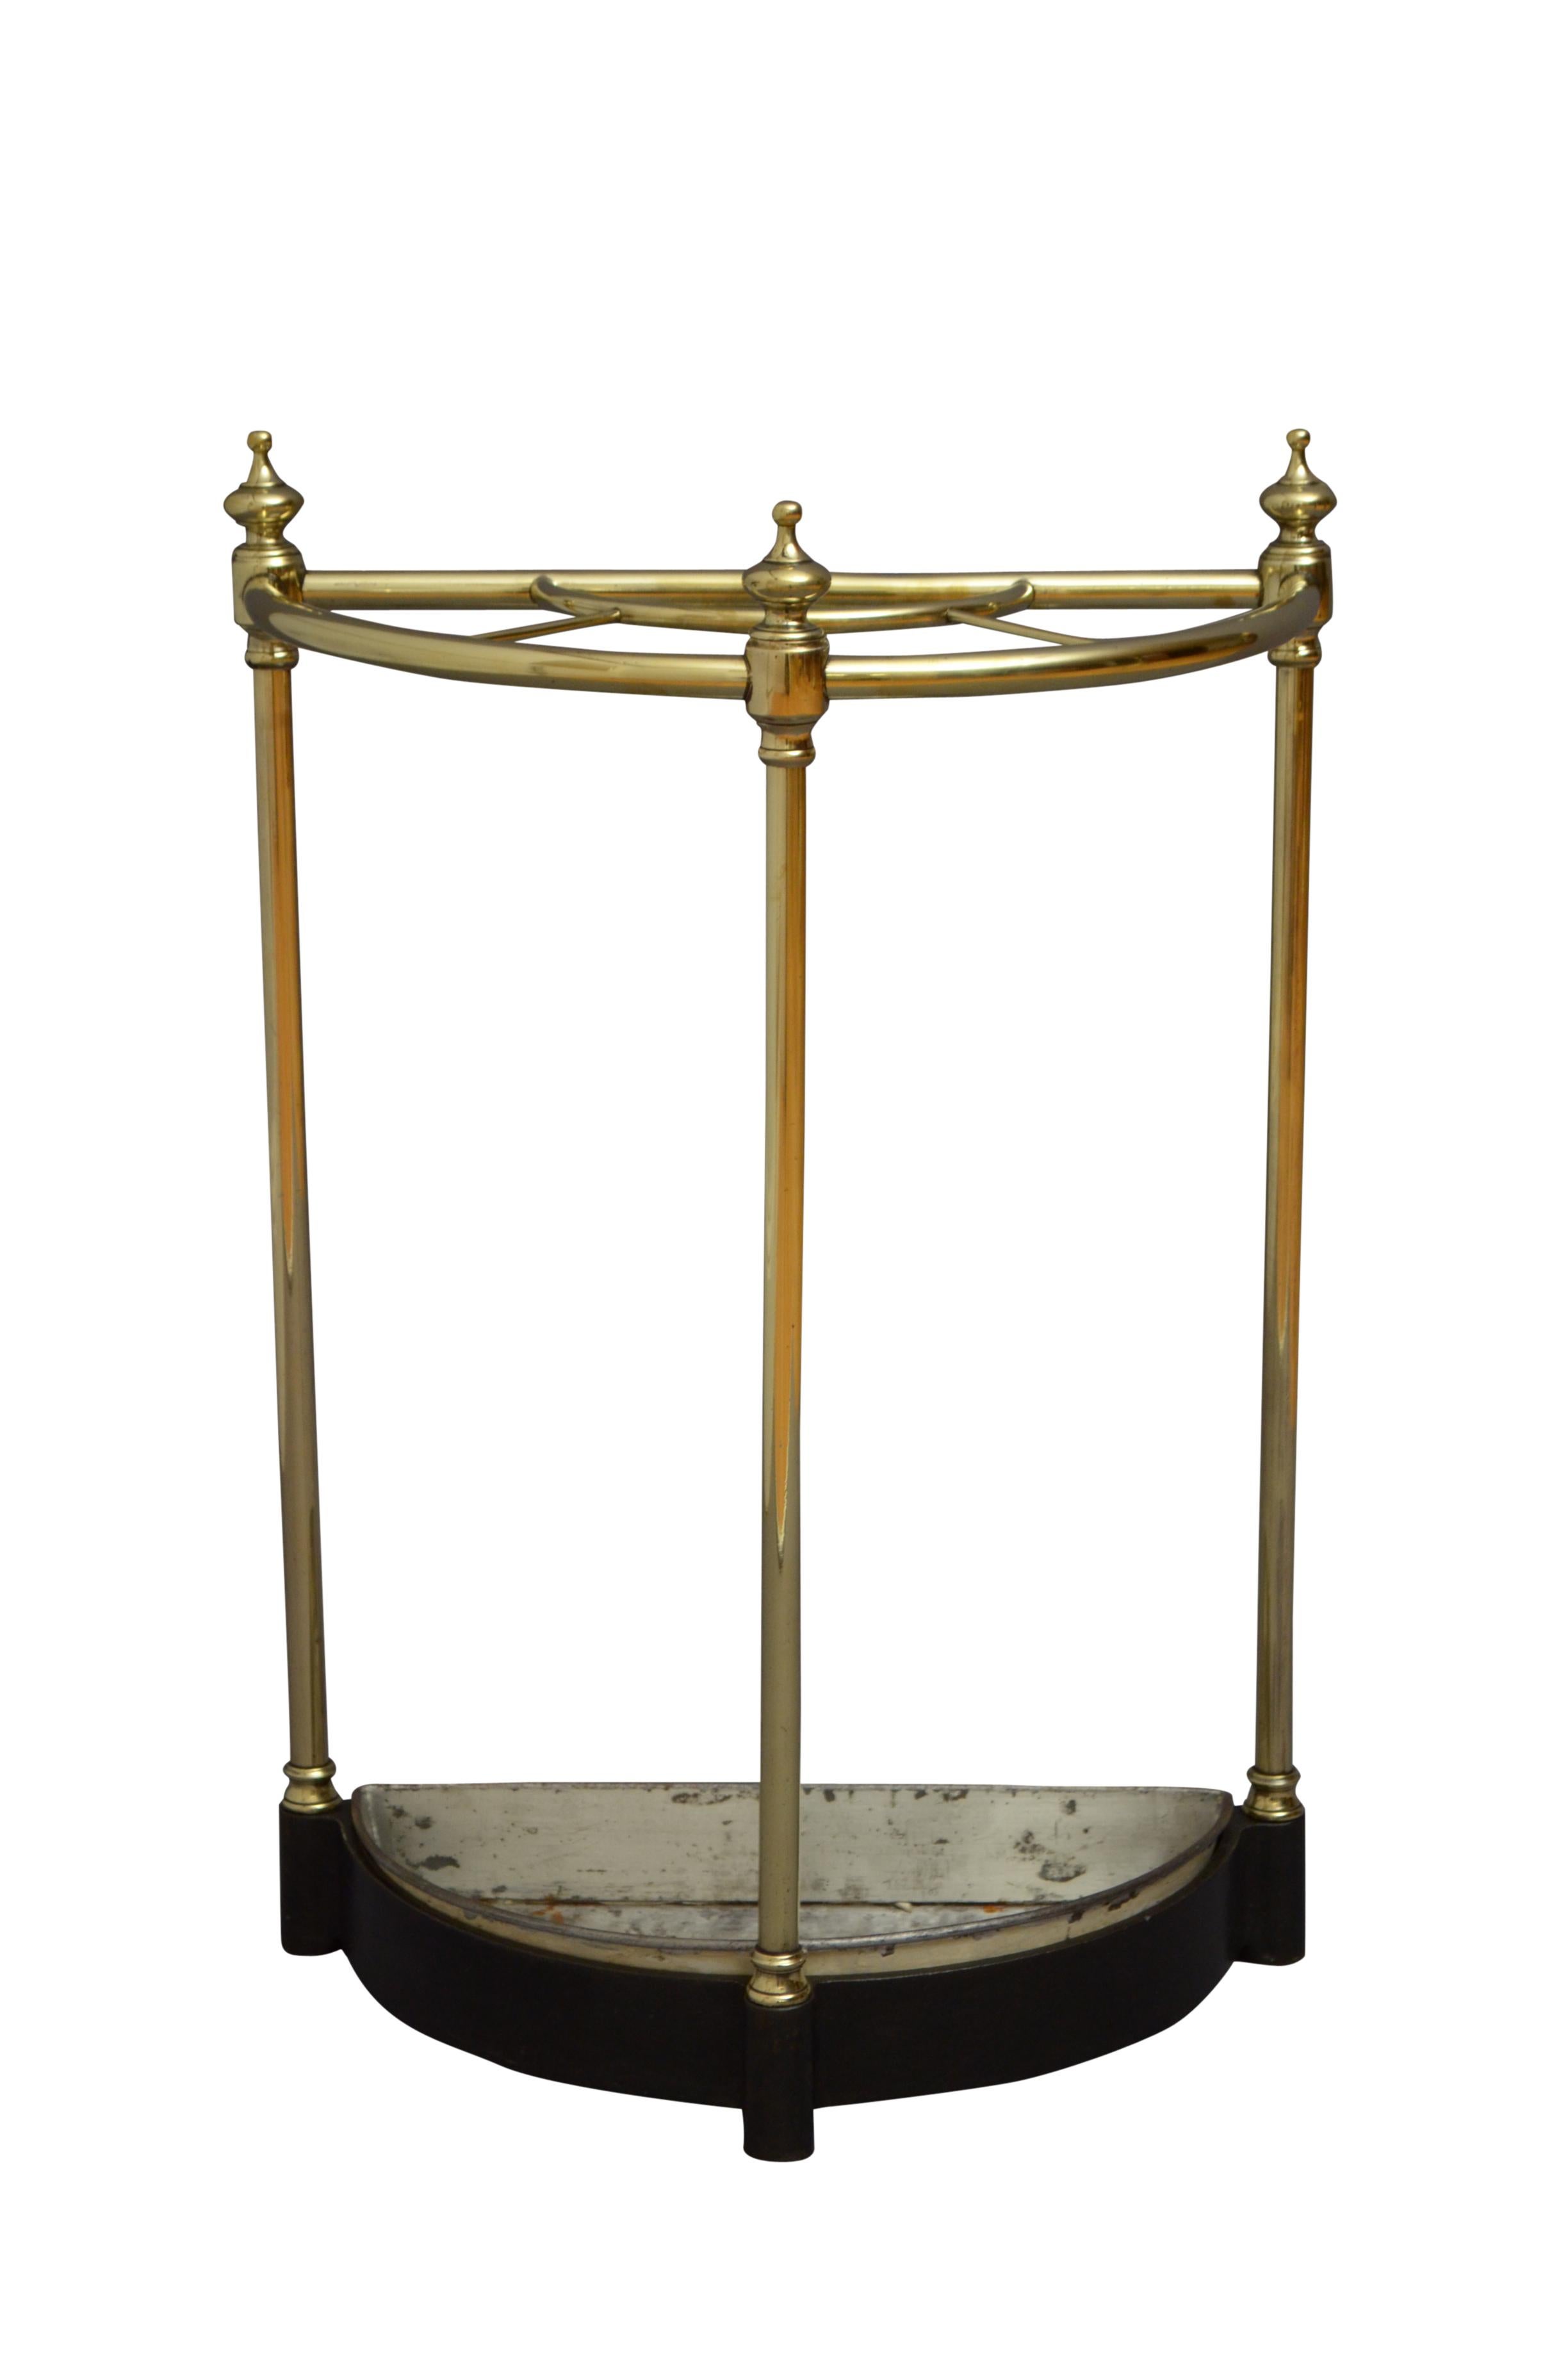 K0168 Victorian brass umbrella stand of half moon outlie with three finials, removable drip tray and cast iron base. This walking sticks Stand / umbrella Stand has been cleaned and polished and it is in home ready condition. c1880
Measures: H24.5